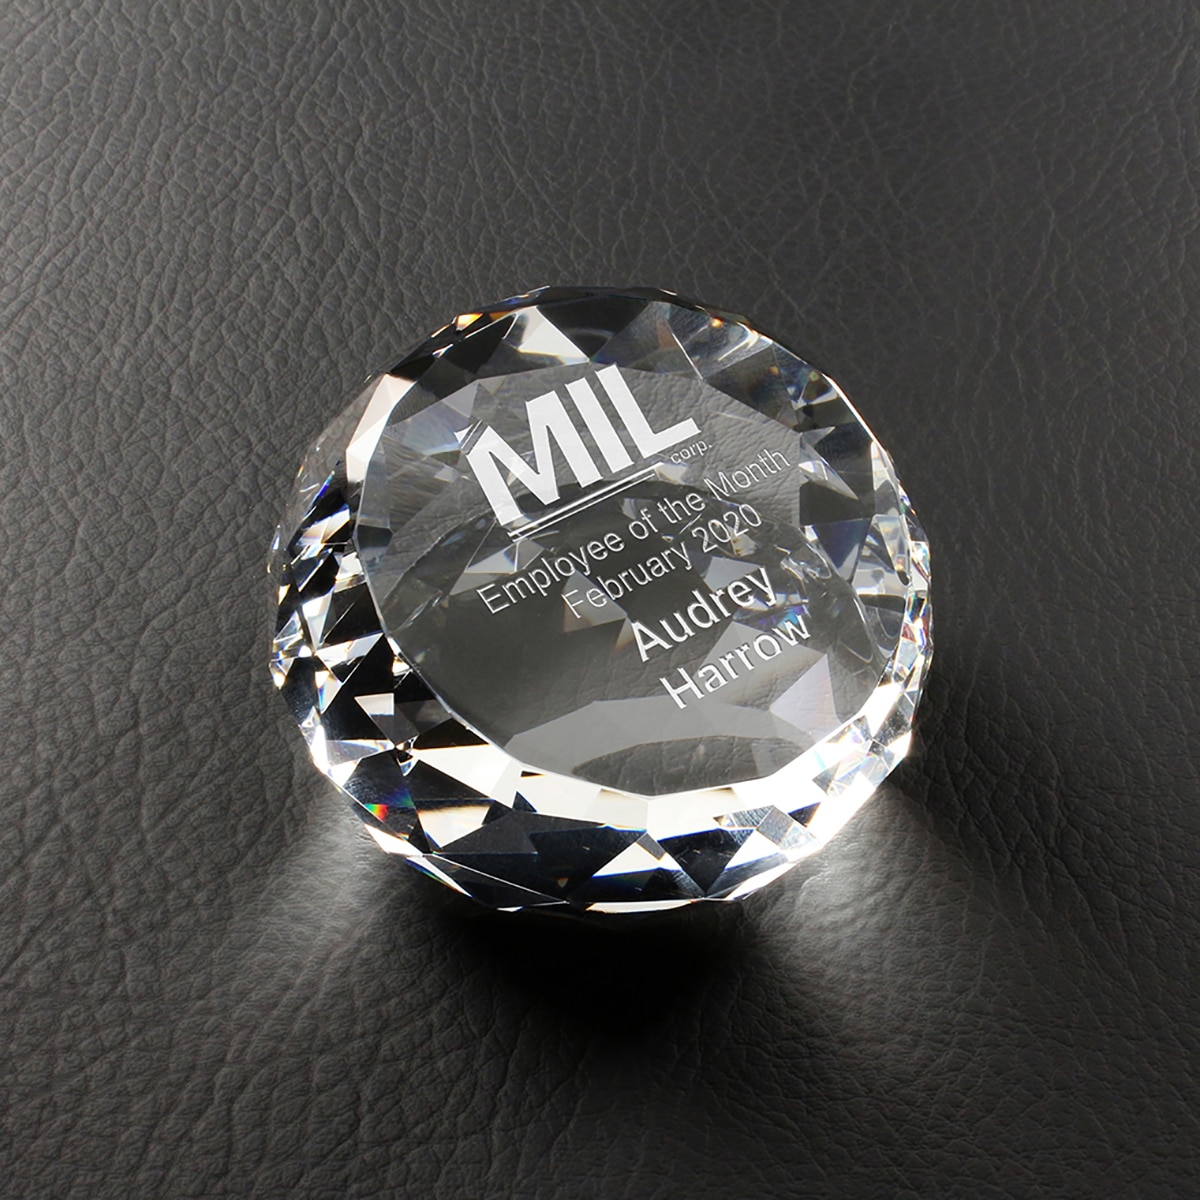 Crystal Paperweight Gem Cut Glassical Designs Awards And Recognition